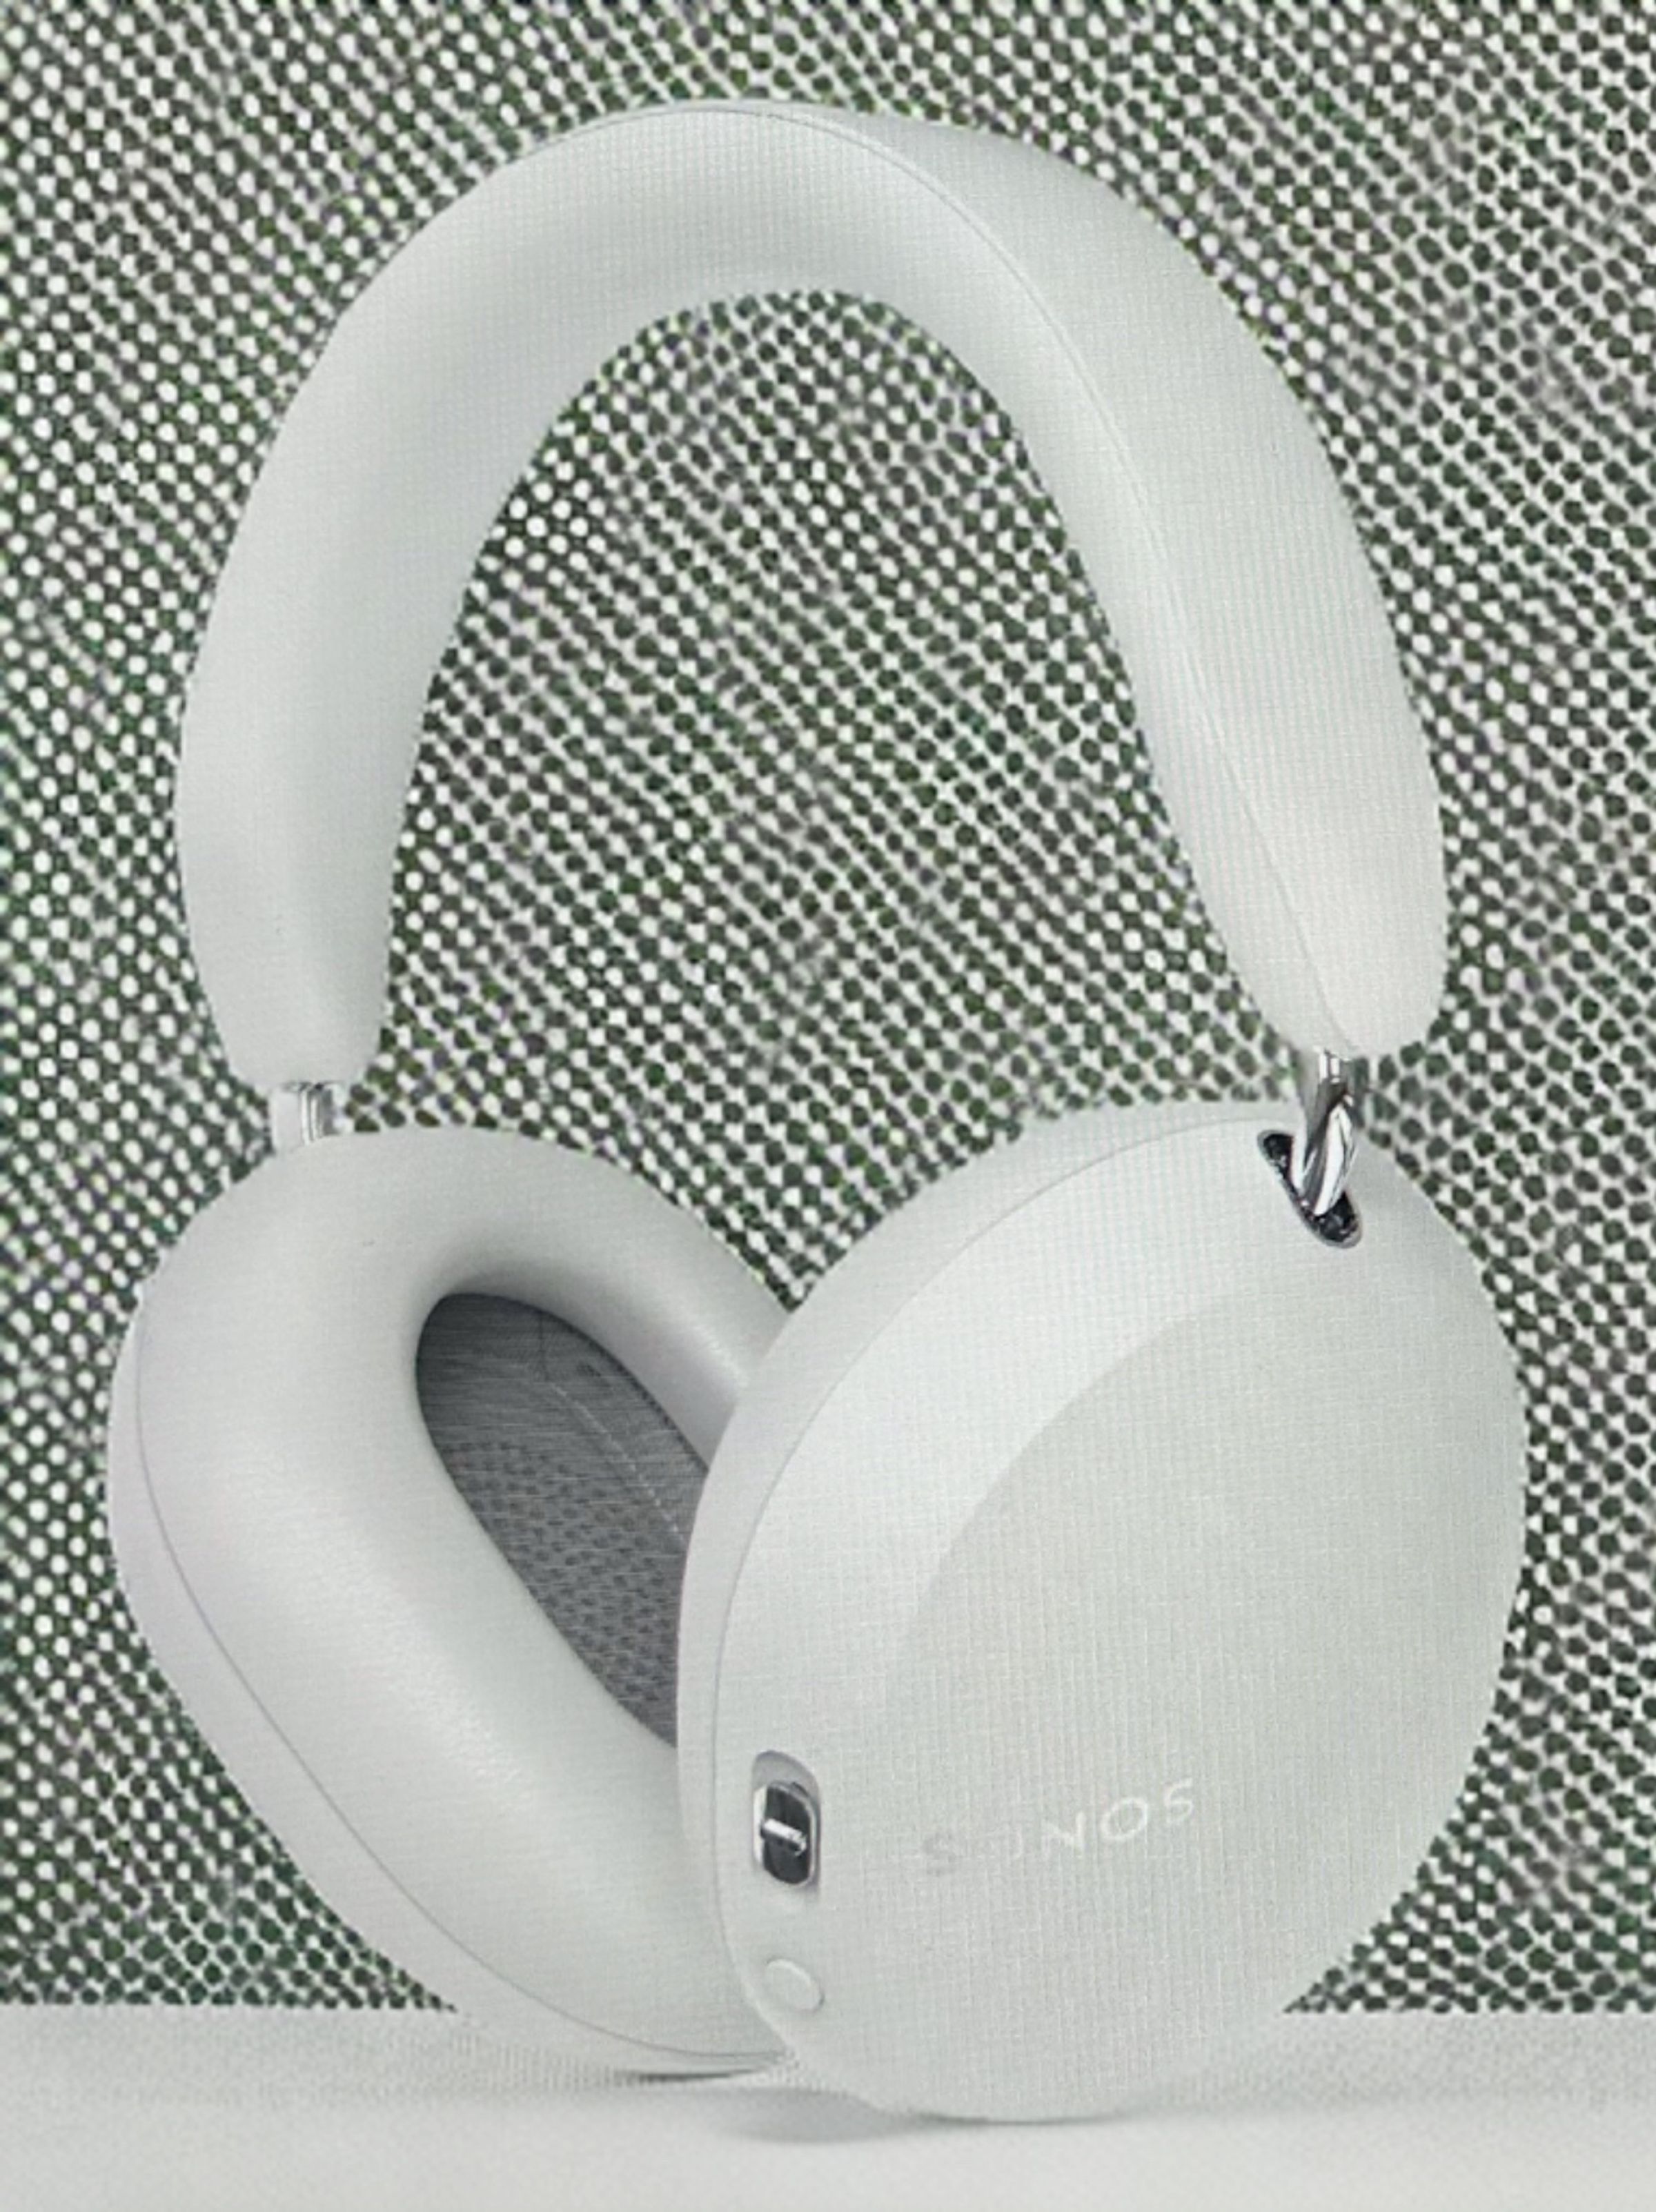 A leaked image of the white Sonos Ace headphones.